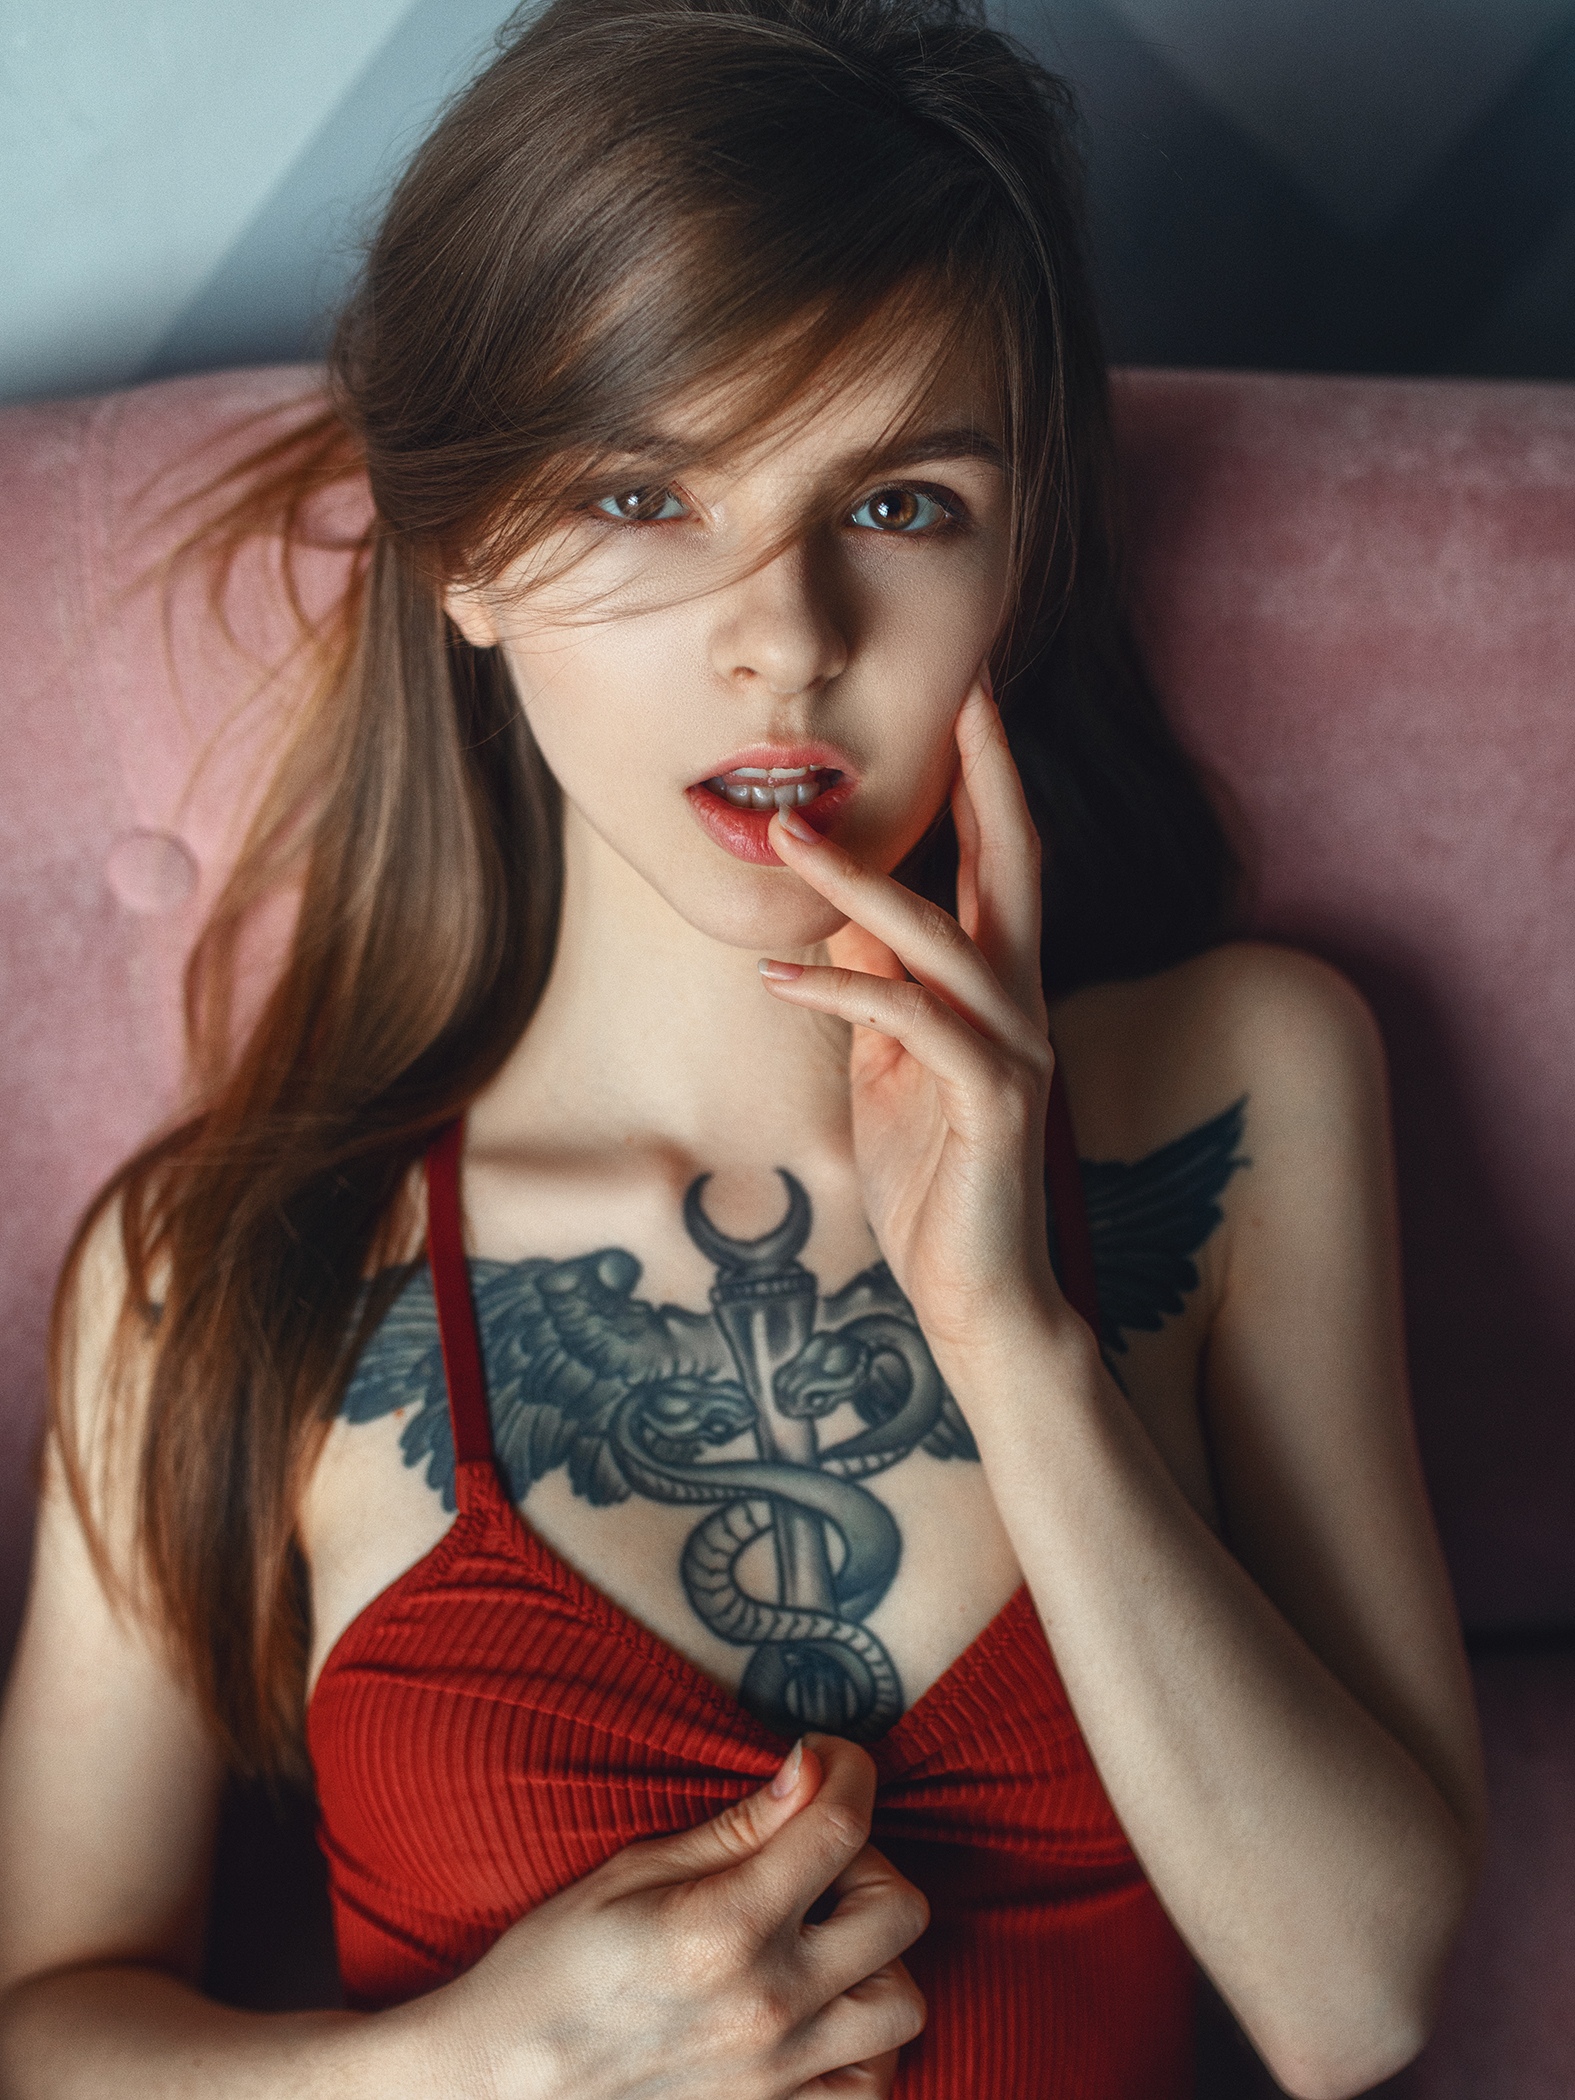 Brunette Portrait Display Brown Eyes Finger On Lips Pink Lipstick Tank Top Tattoo Looking At Viewer  1575x2100